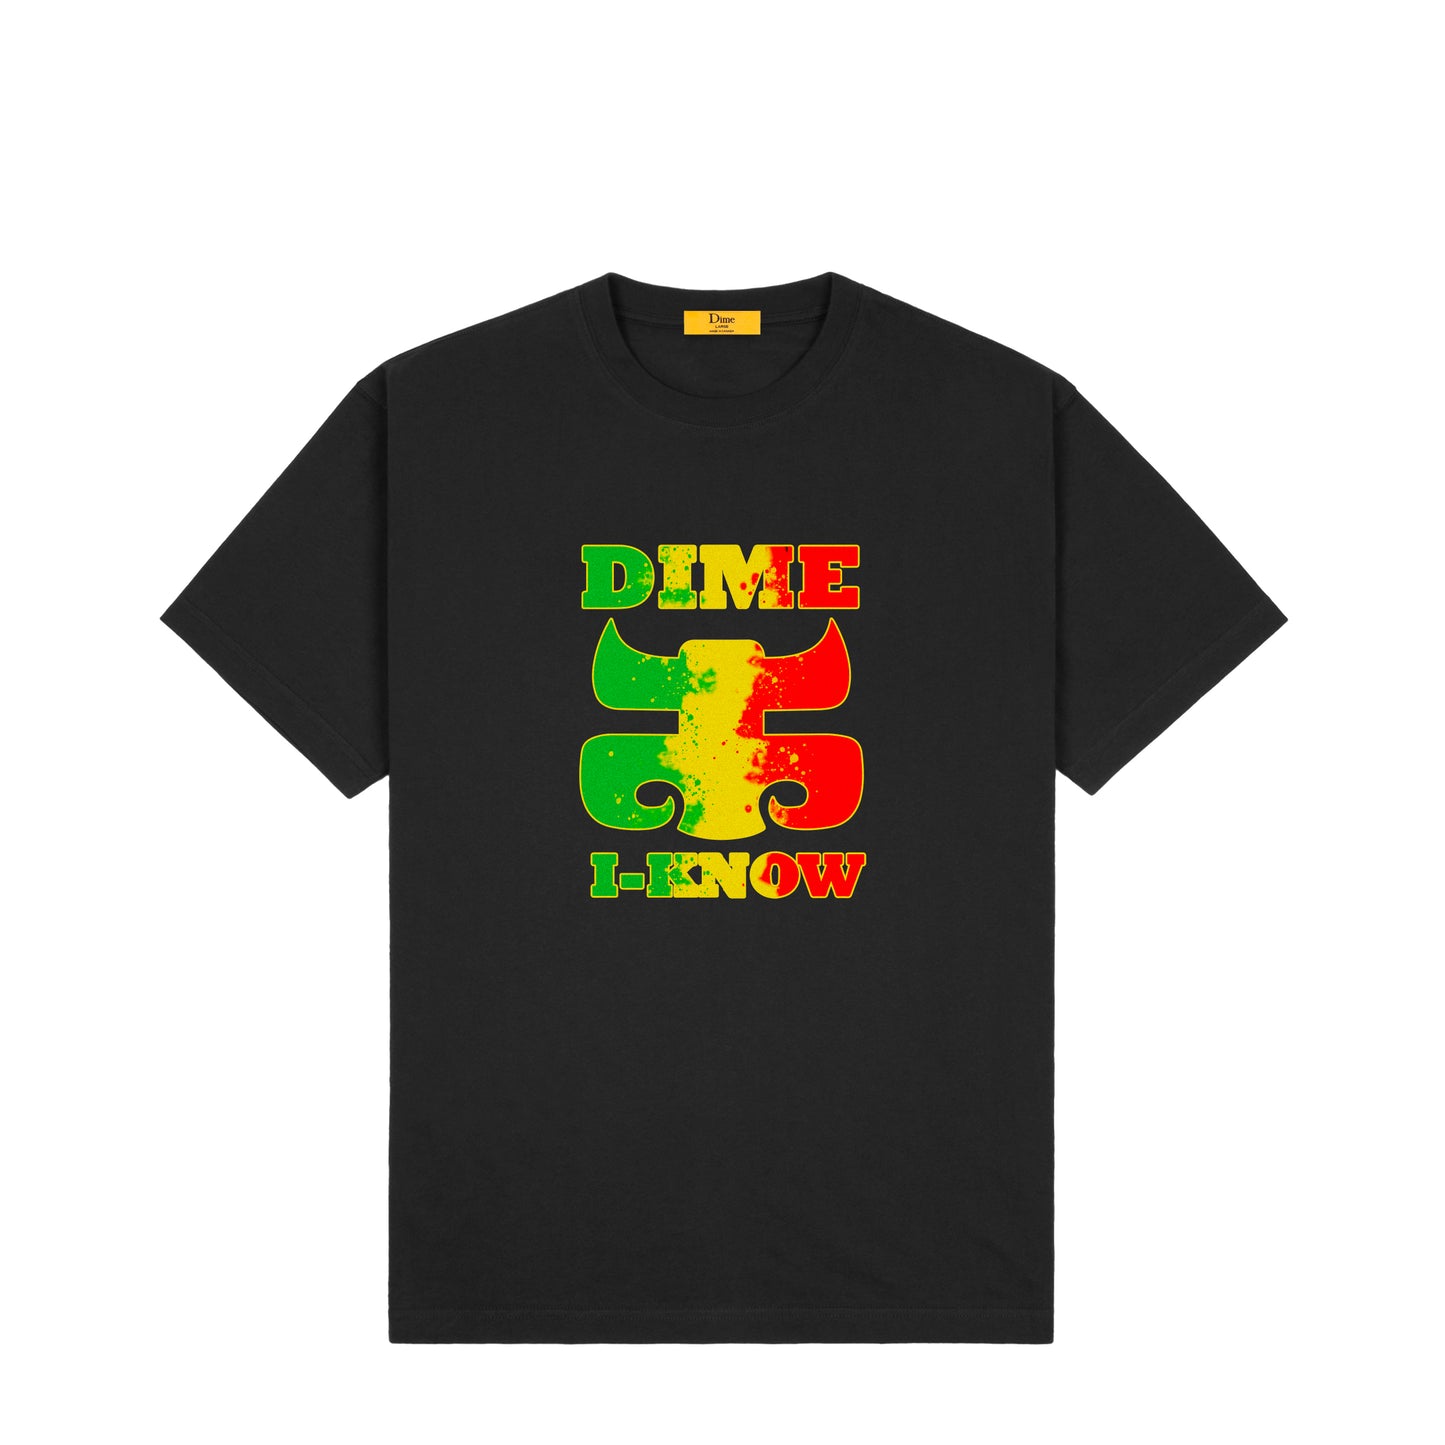 I Know S/S Tee Shirt Blk(size options listed)